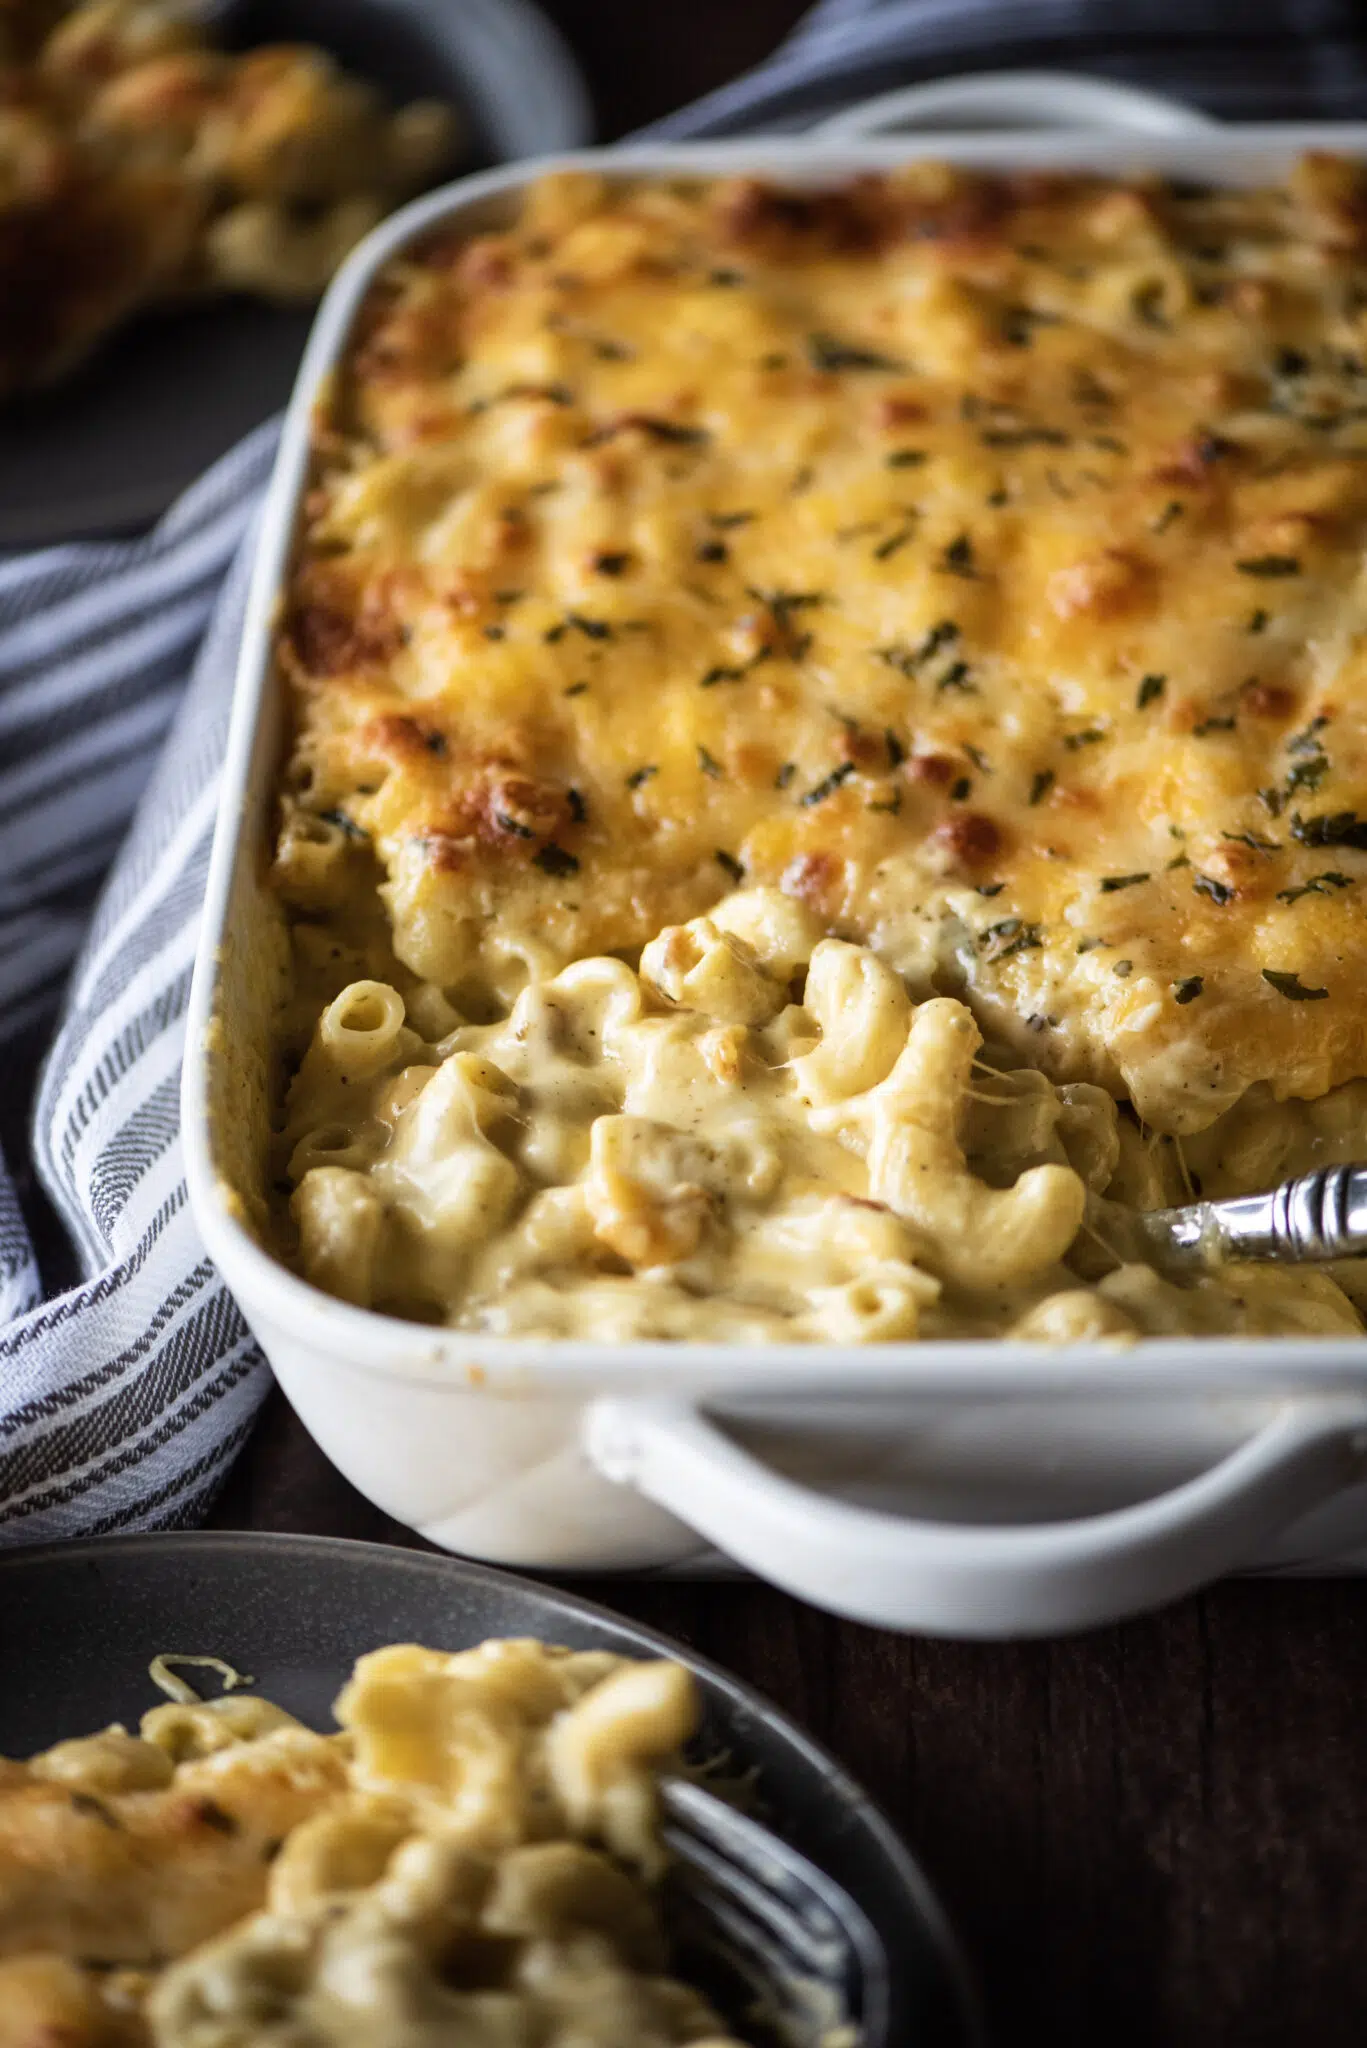 Baked macaroni and cheese in casserole dish